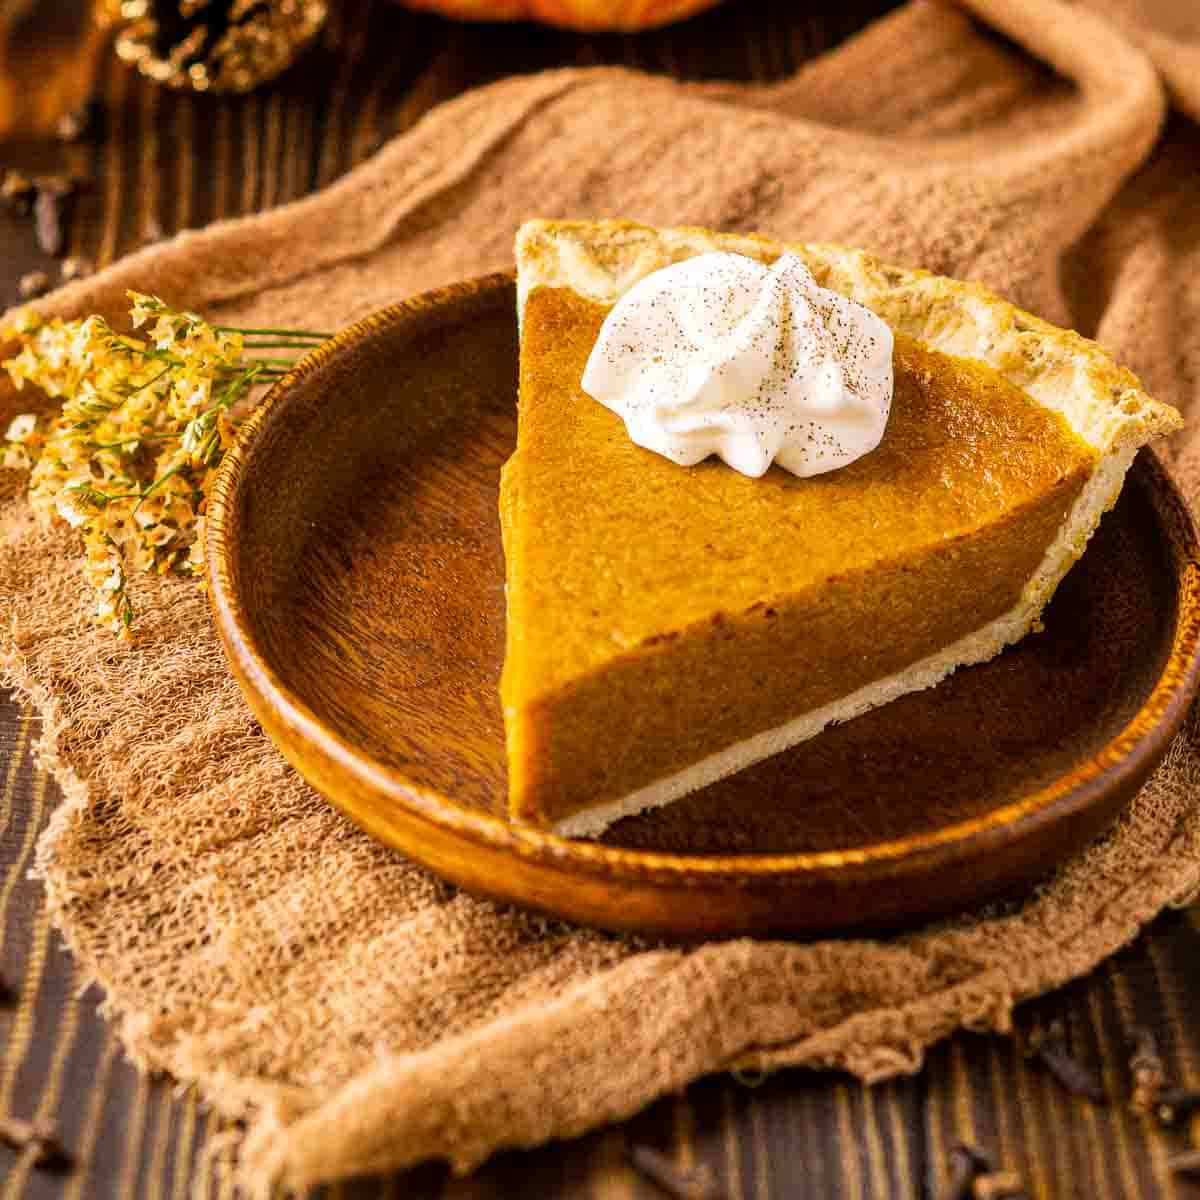 A slice of the pumpkin pie on a small wooden plate with spices all around it.